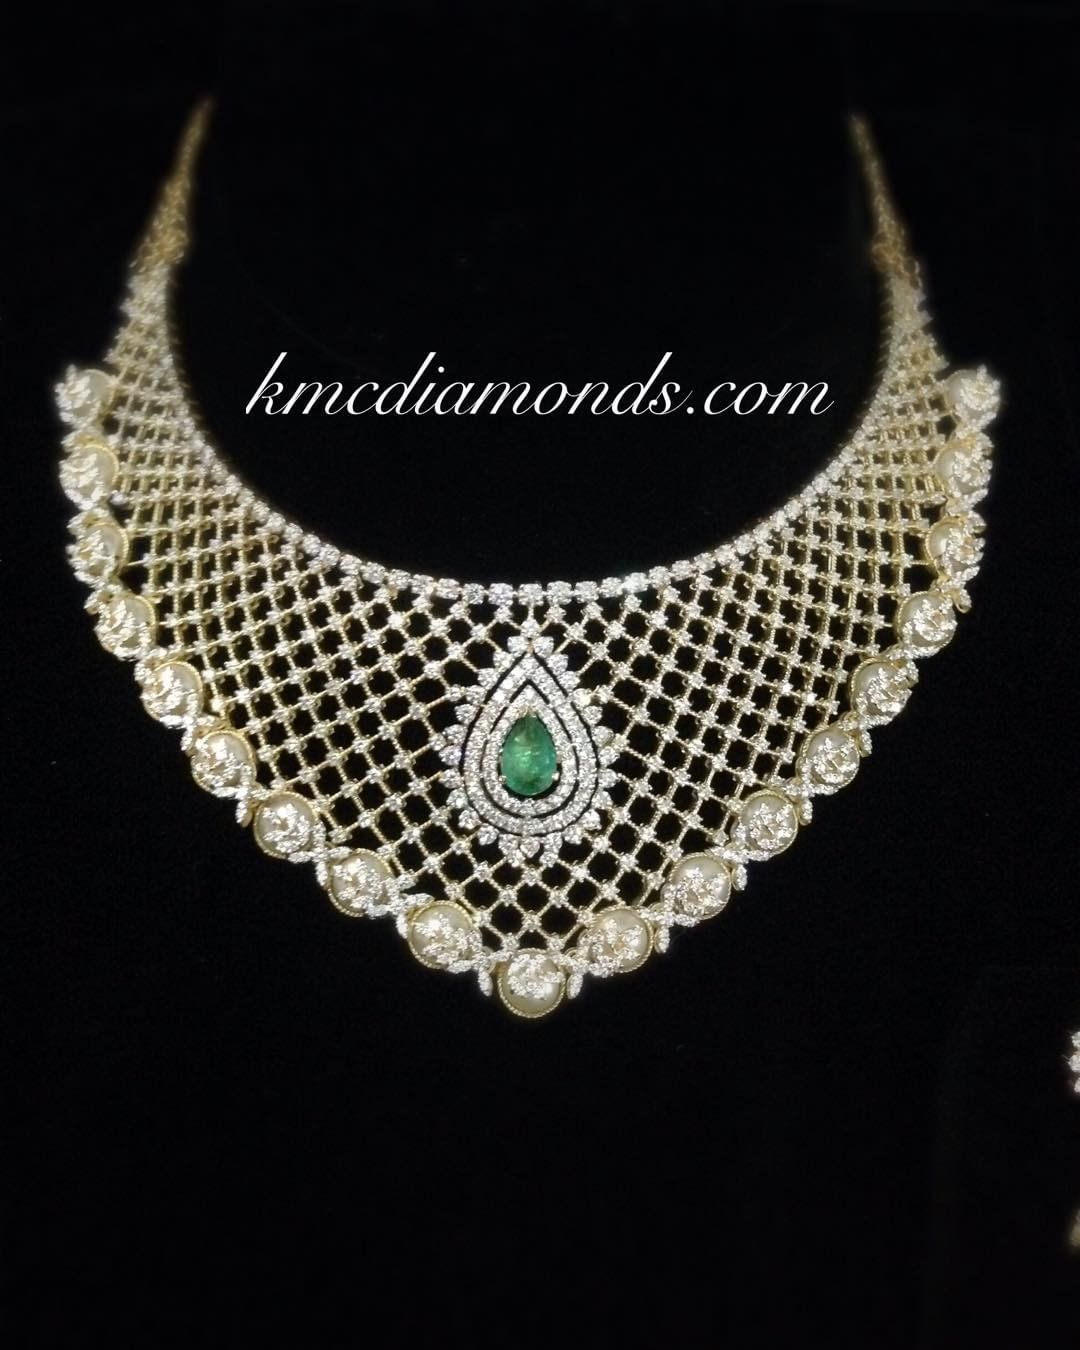 Attractive Diamond Necklace From Kmcl Diamonds